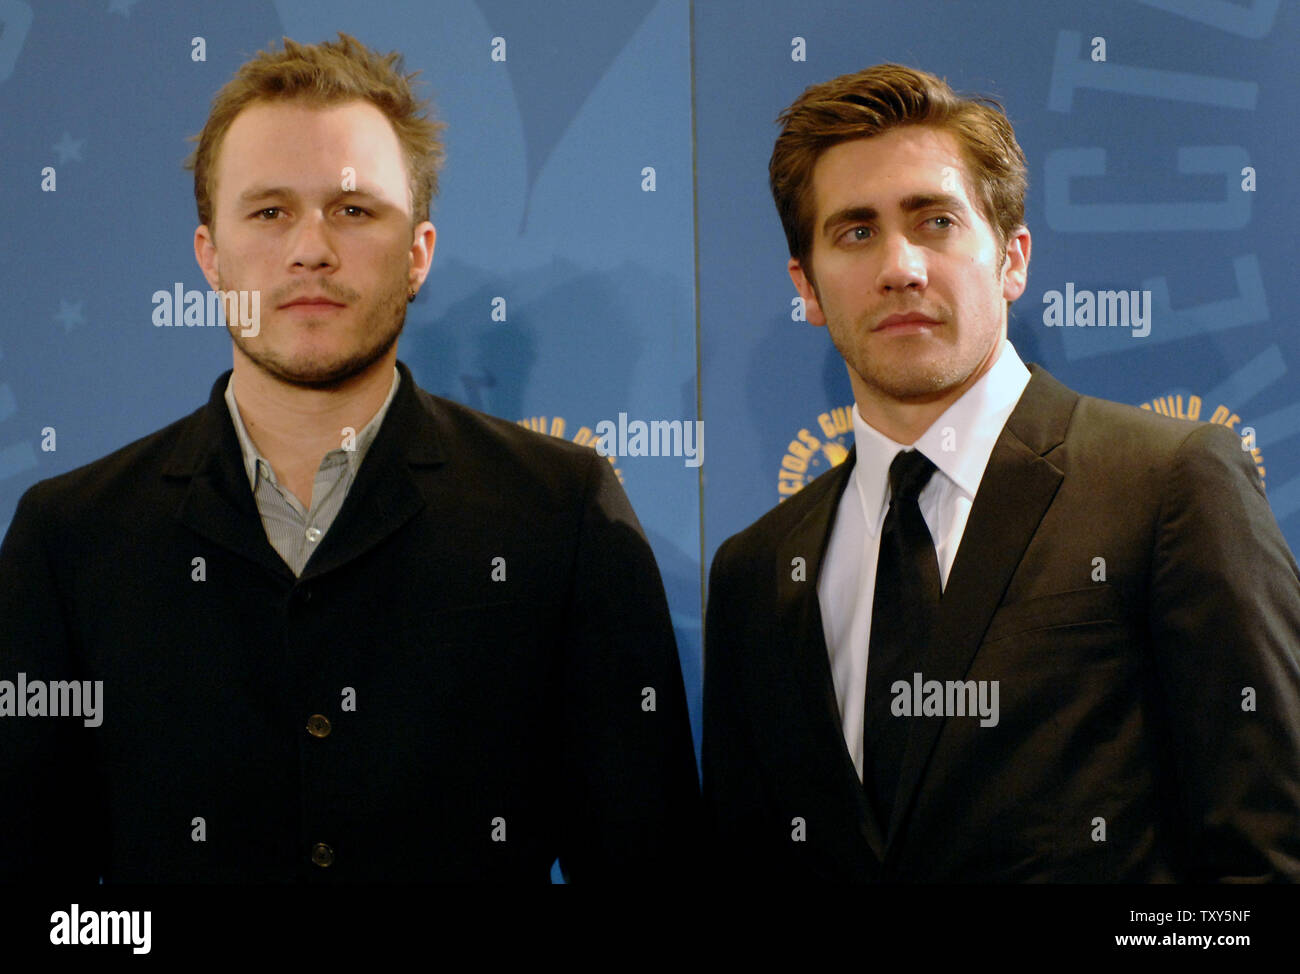 Heath Ledger (L) and Jake Gyllenhaal, who co-star in the motion picture 'Brokeback Mountain' appear backstage at the 58th annual Directors Guild of America Awards in Los Angeles on January 28, 2006. (UPI Photo/Jim Ruymen) Stock Photo